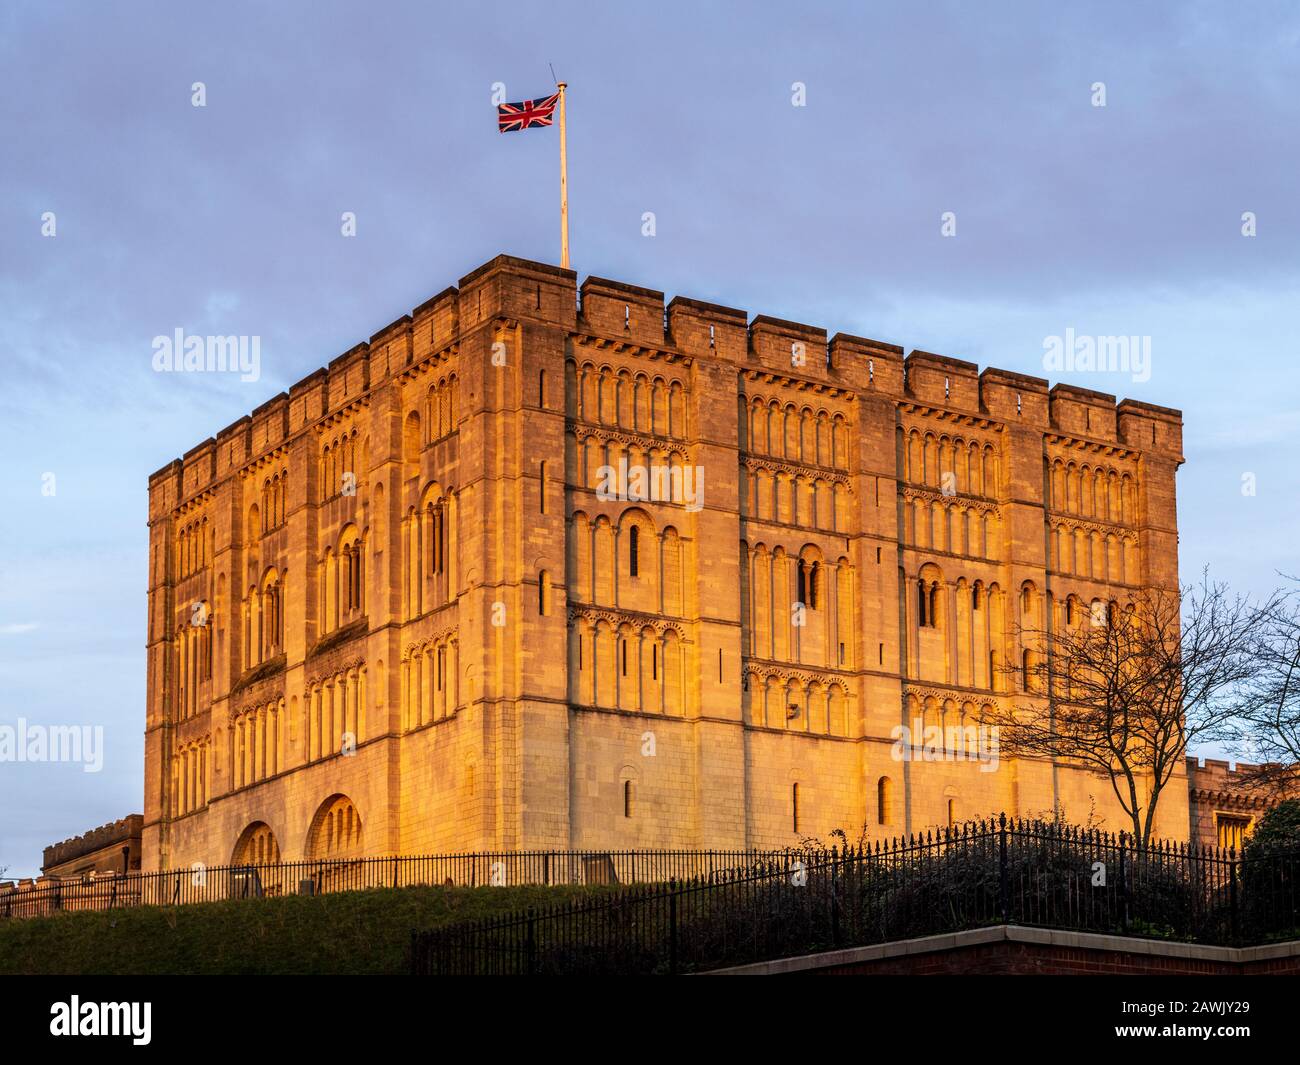 Norwich Castle - Norman castle founded by William the Conqueror around 1075 the keep pictured here was built between 1095 and 1110. Stock Photo